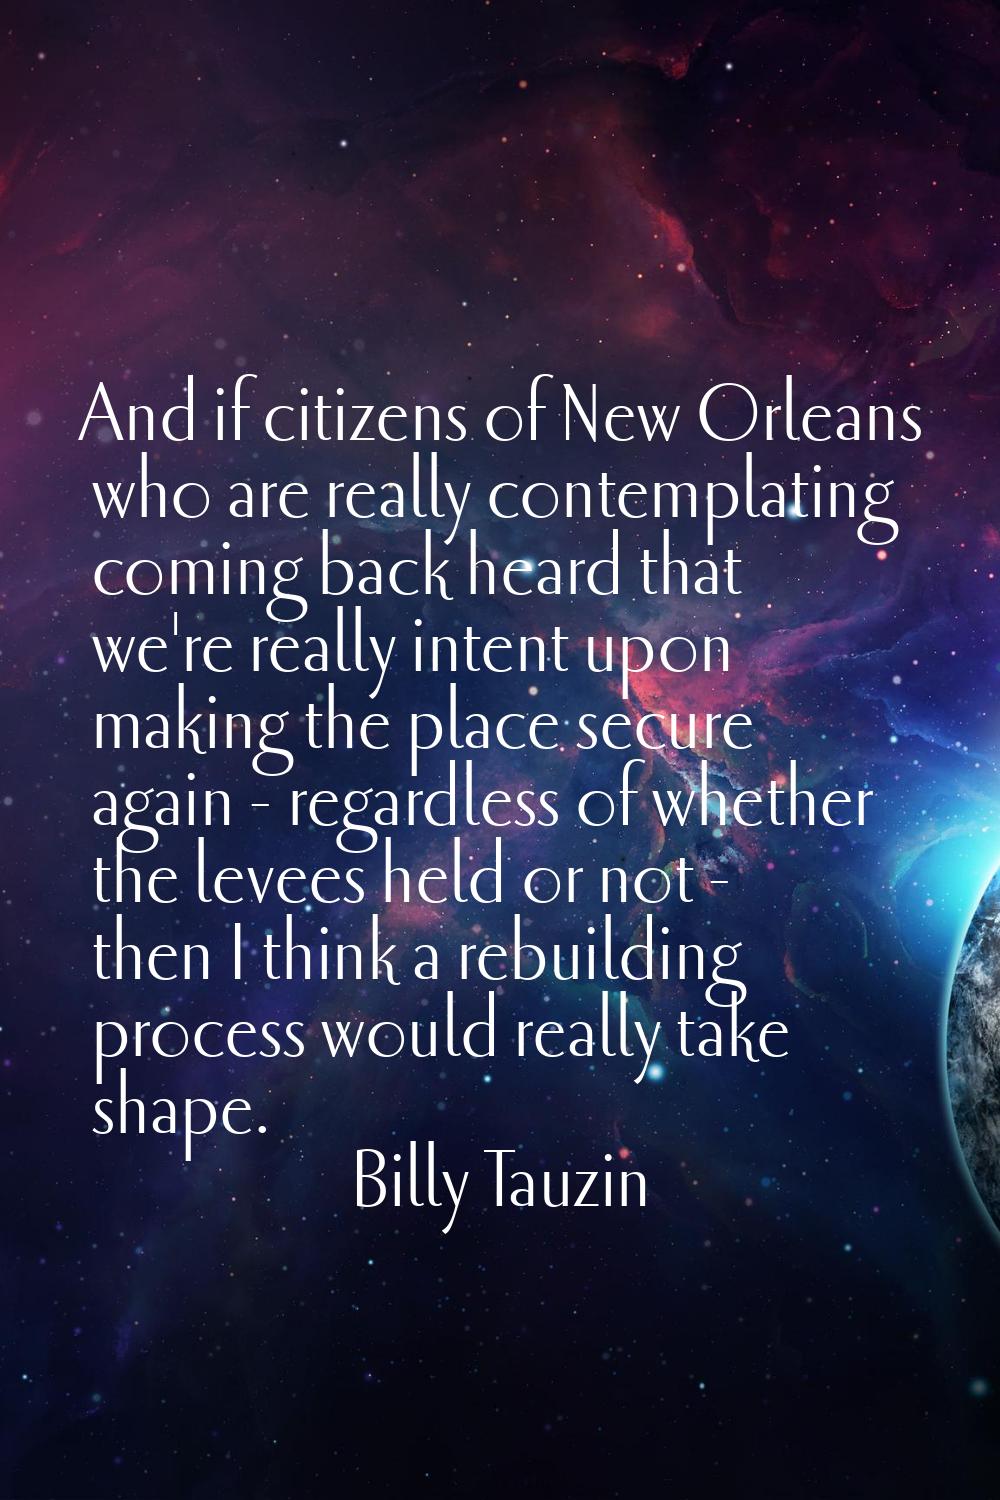 And if citizens of New Orleans who are really contemplating coming back heard that we're really int